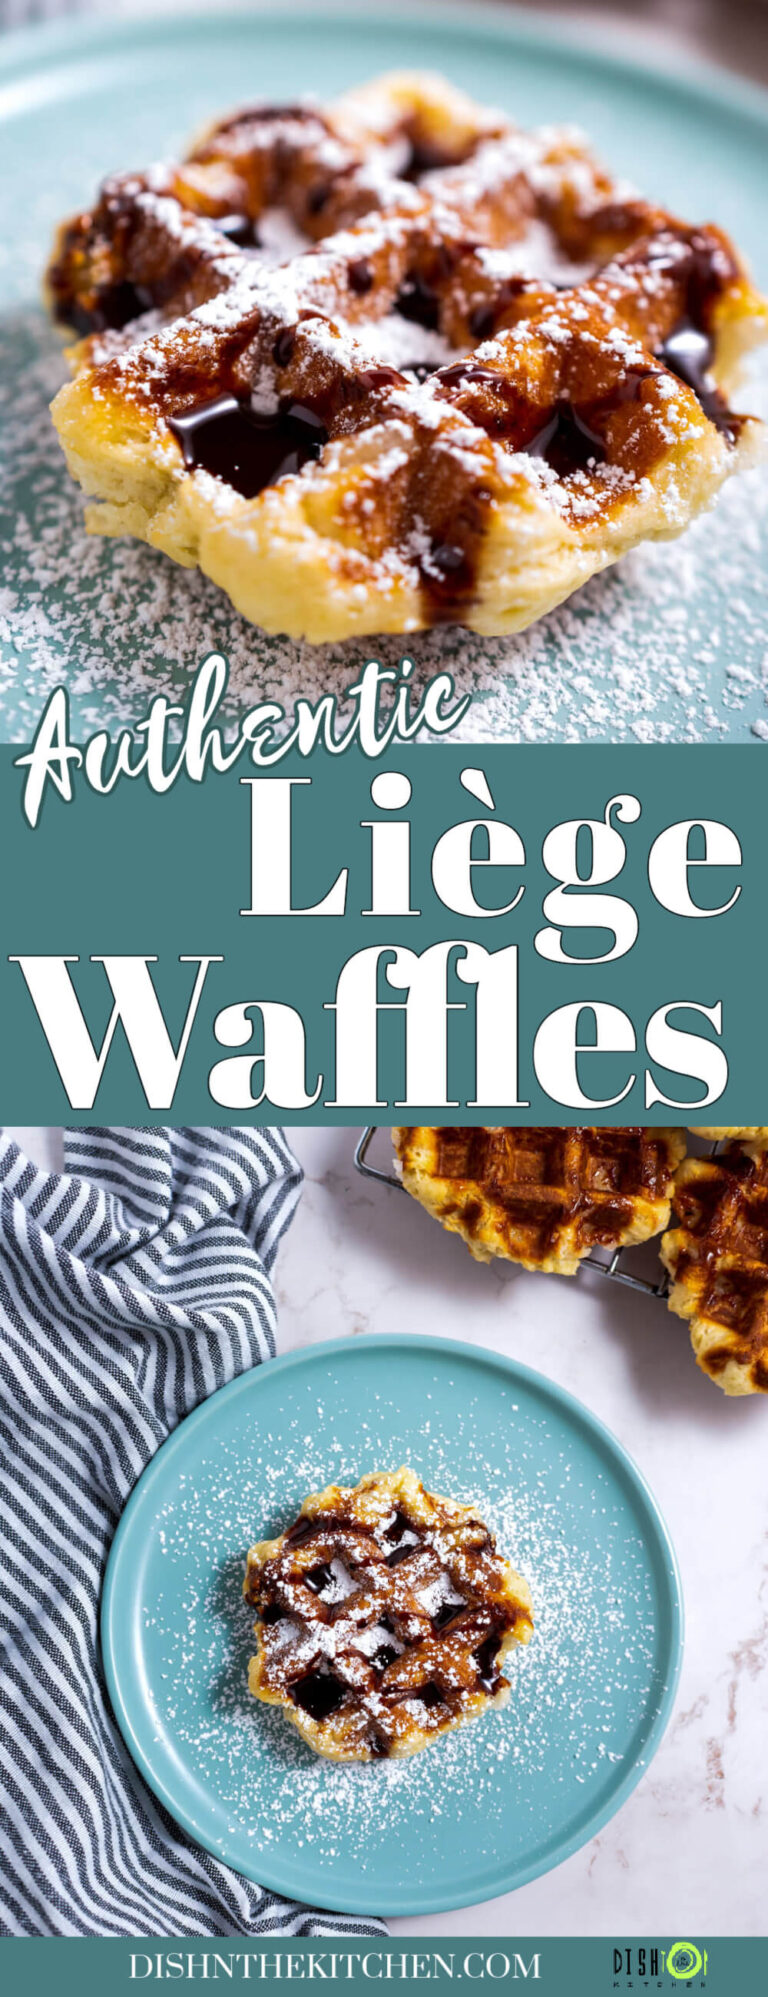 Pinterest image of a Belgian Liège Waffle with confectioners' sugar and chocolate sauce sitting on a blue plate.